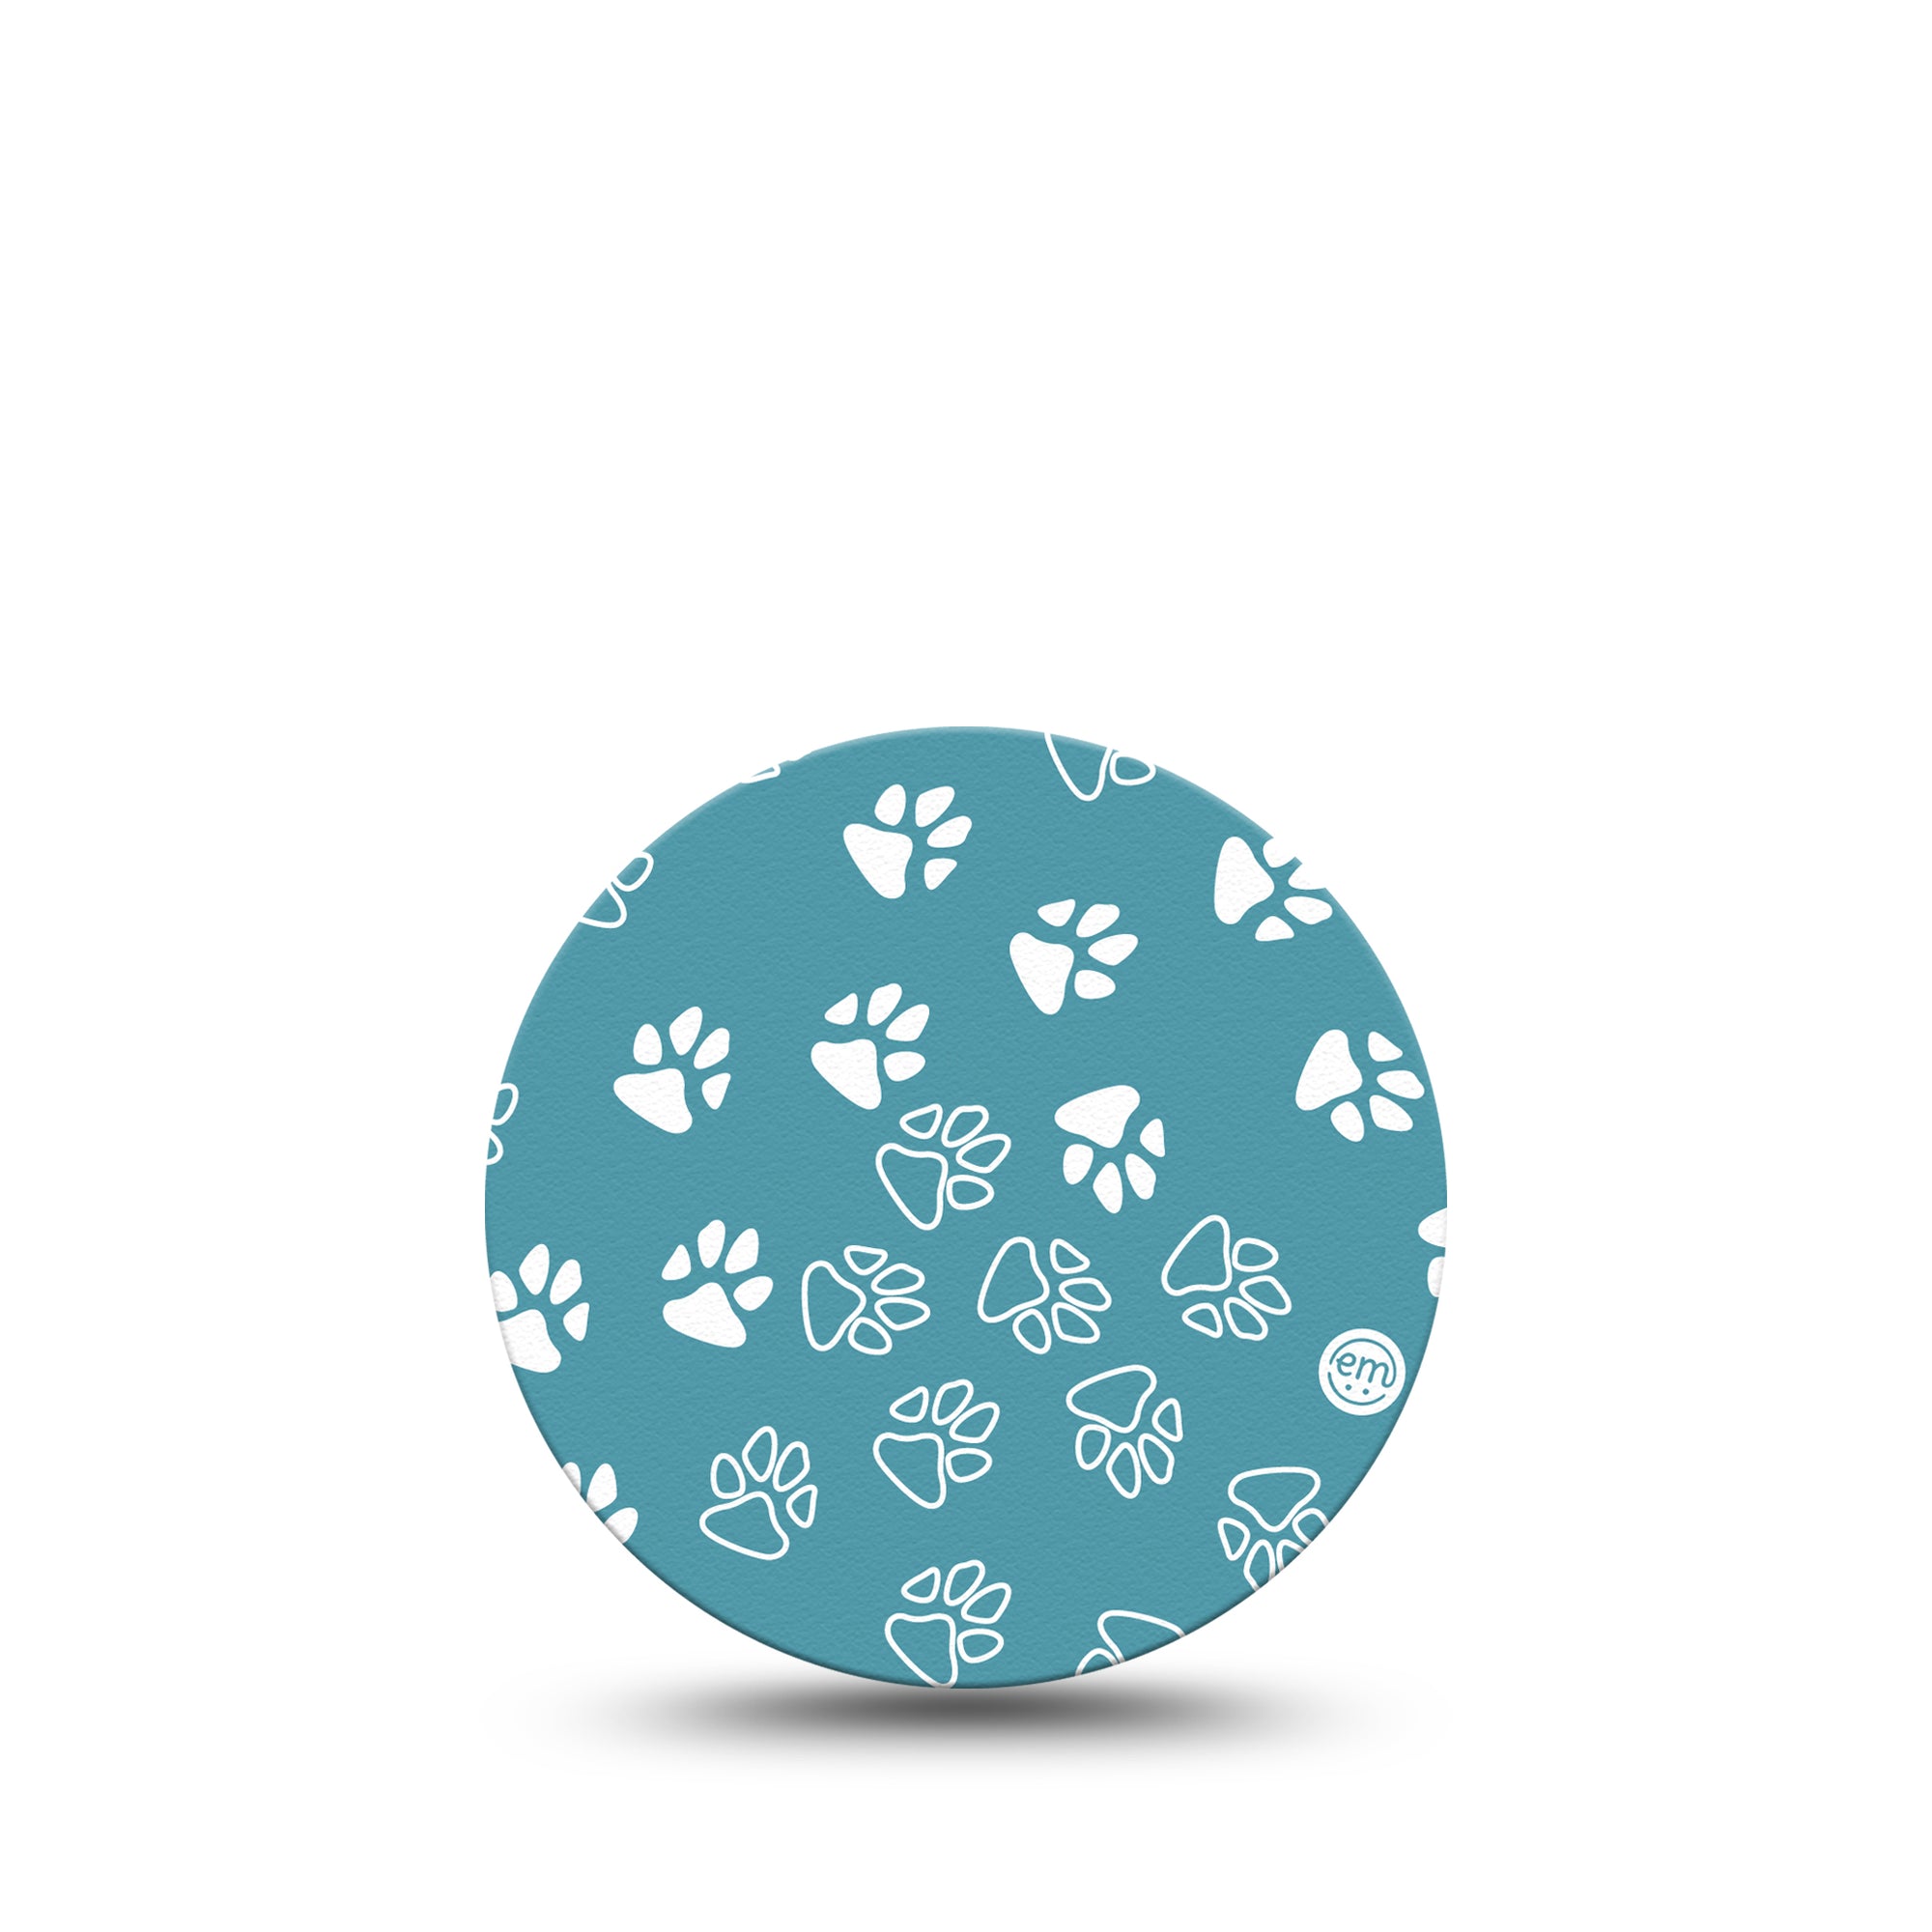 ExpressionMed Pawprint Libre 3 Overpatch, Single, Small Pawprint Themed, CGM Adhesive Tape Design